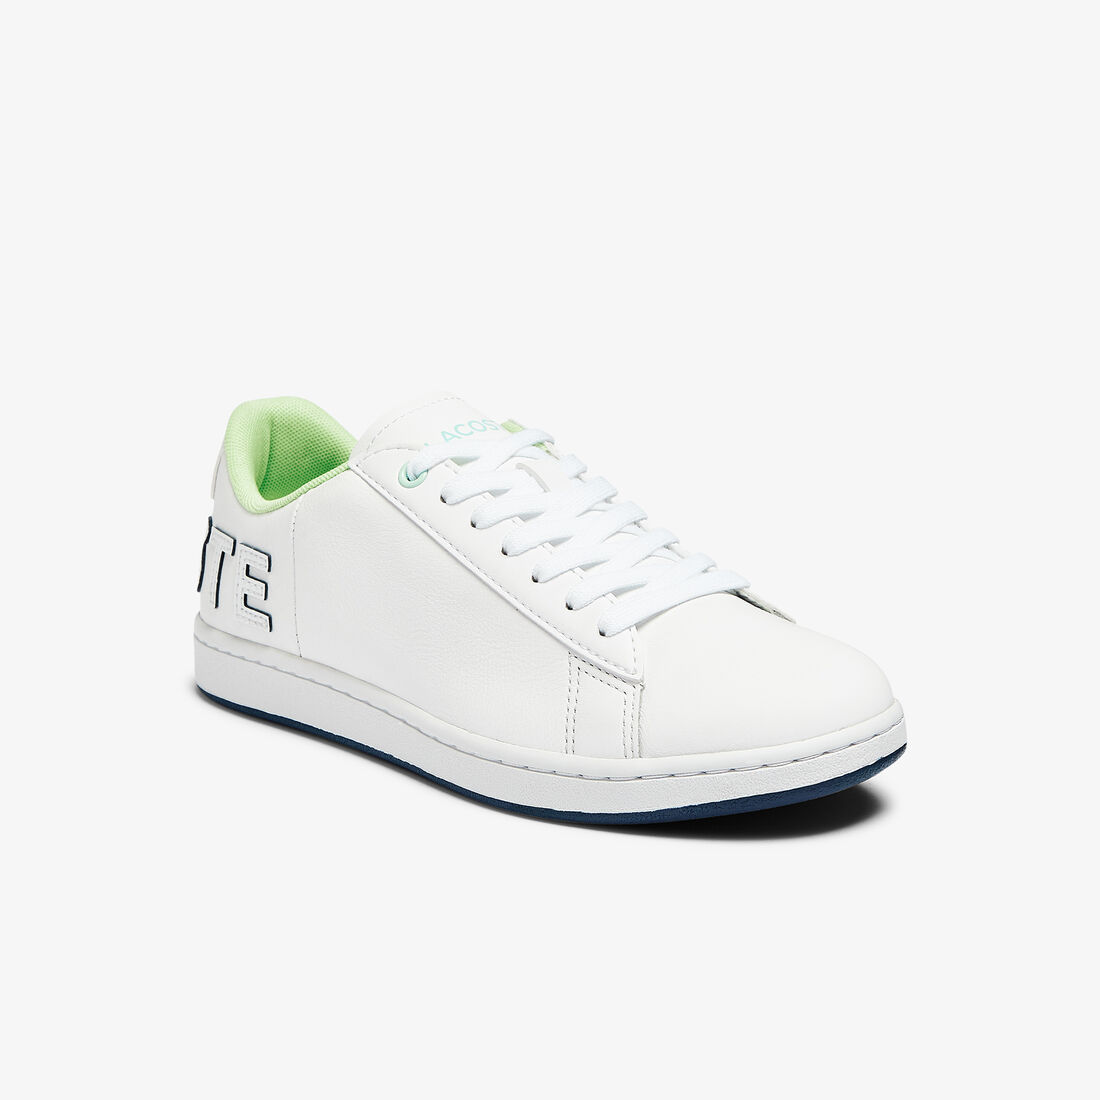 Women's Carnaby Evo Leather Citrus Accent Sneakers